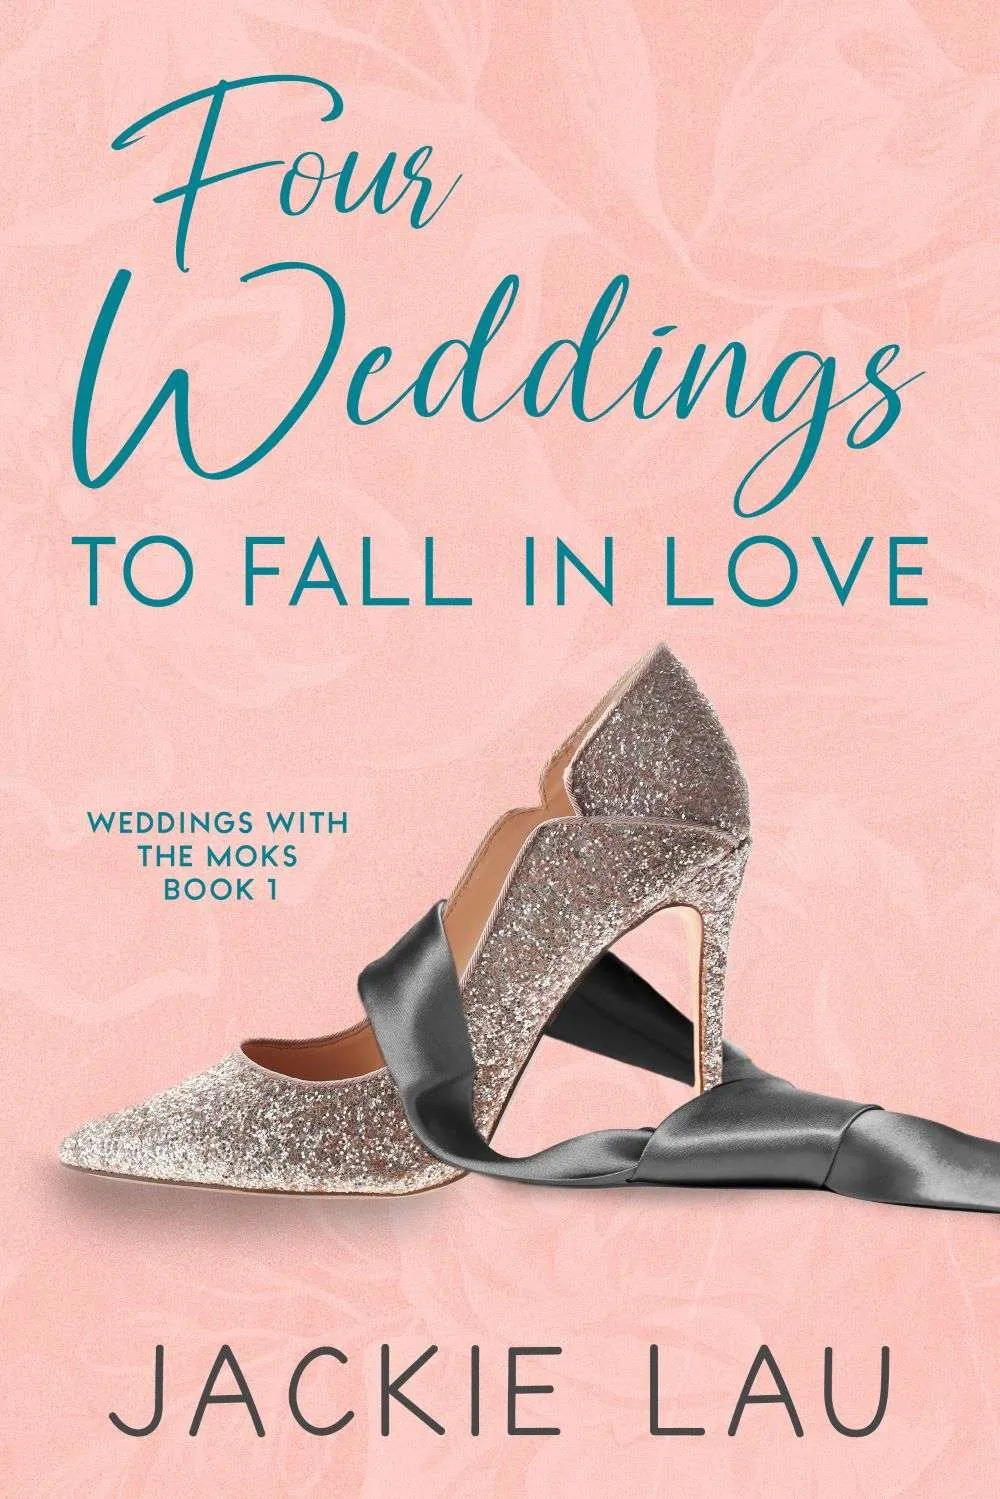 Four Weddings to Fall in Love (Weddings with the Moks #1)